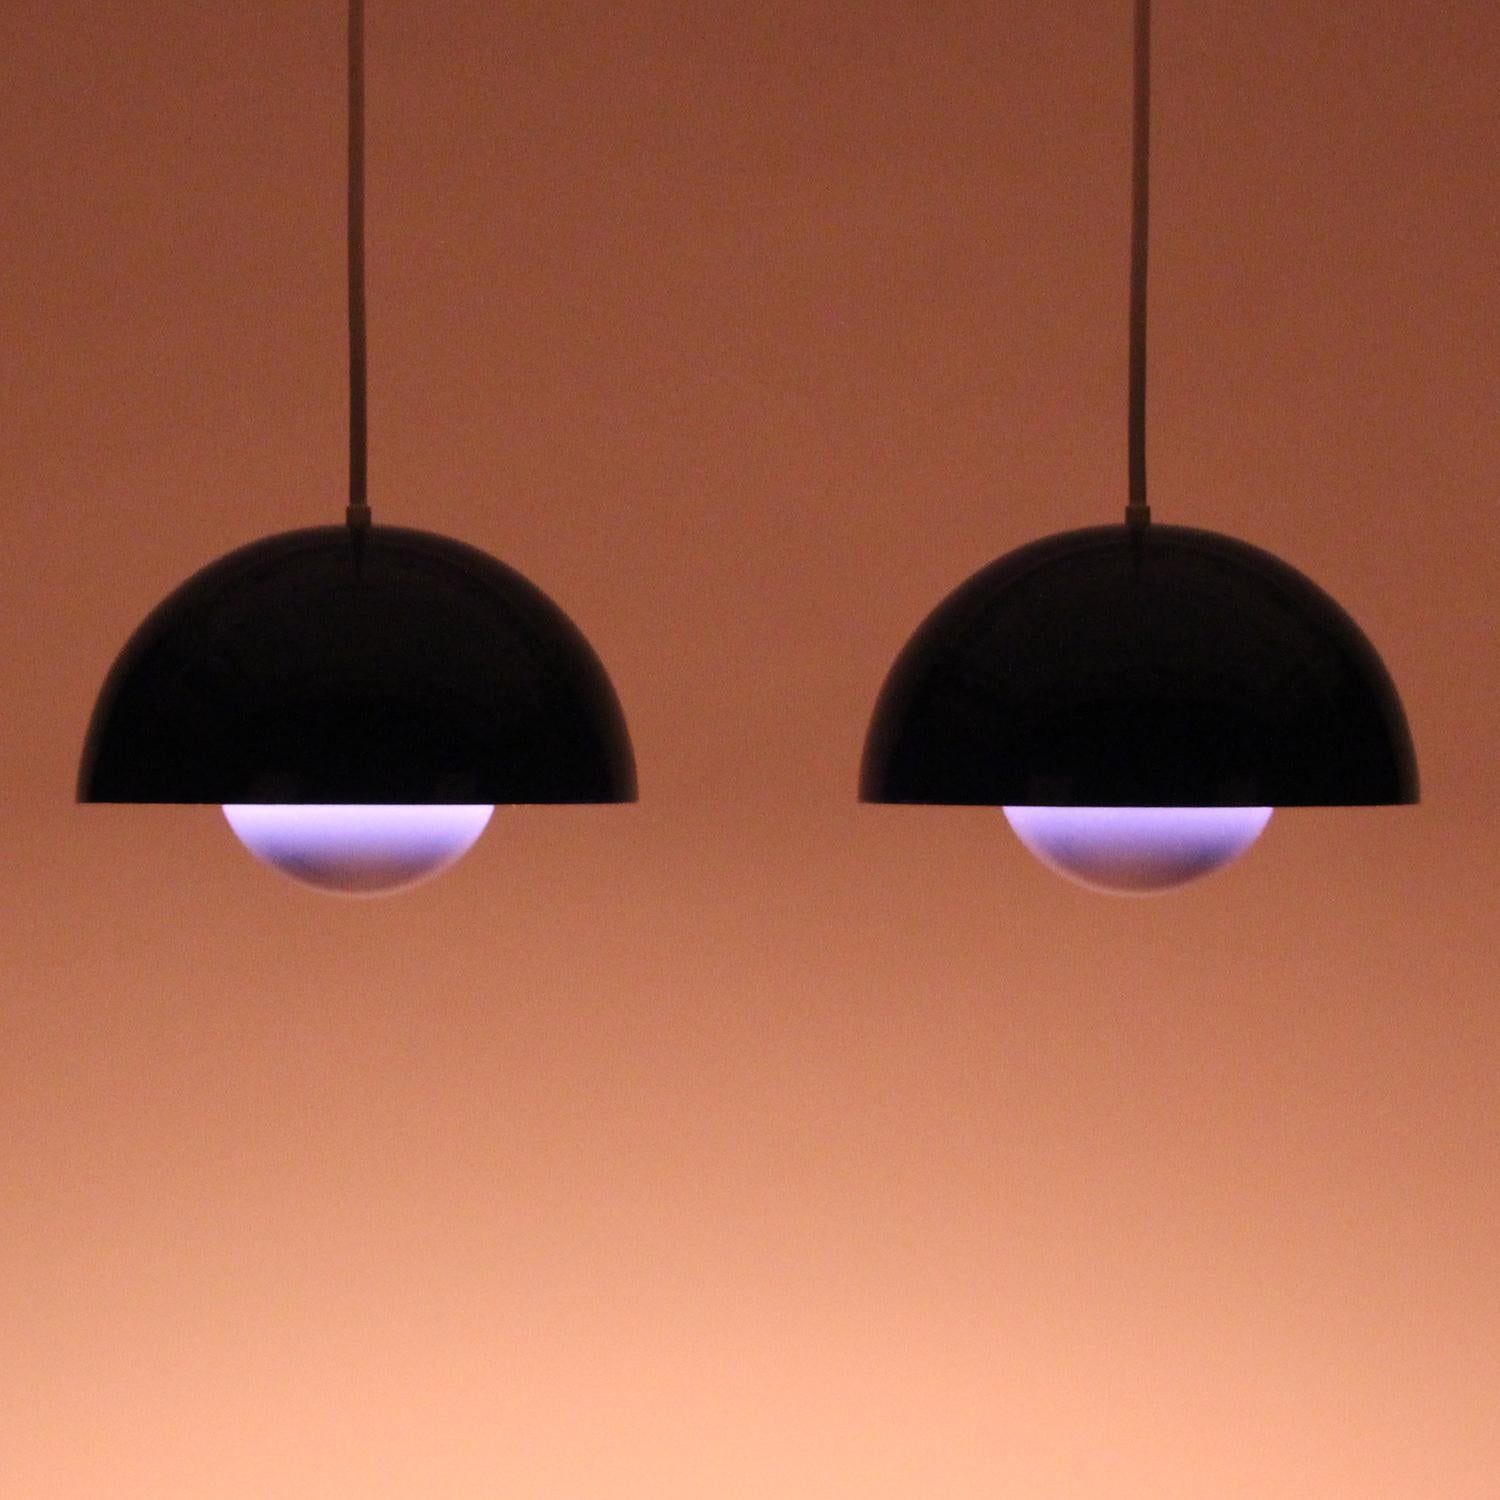 Flowerpot - blue enameled pendant pair by Verner Panton in 1968 and produced by Louis Poulsen. Iconic 1960s lighting design in very good vintage condition!

Flowerpot is a stunning light, simple and organic, with an almost magic allure. The upper